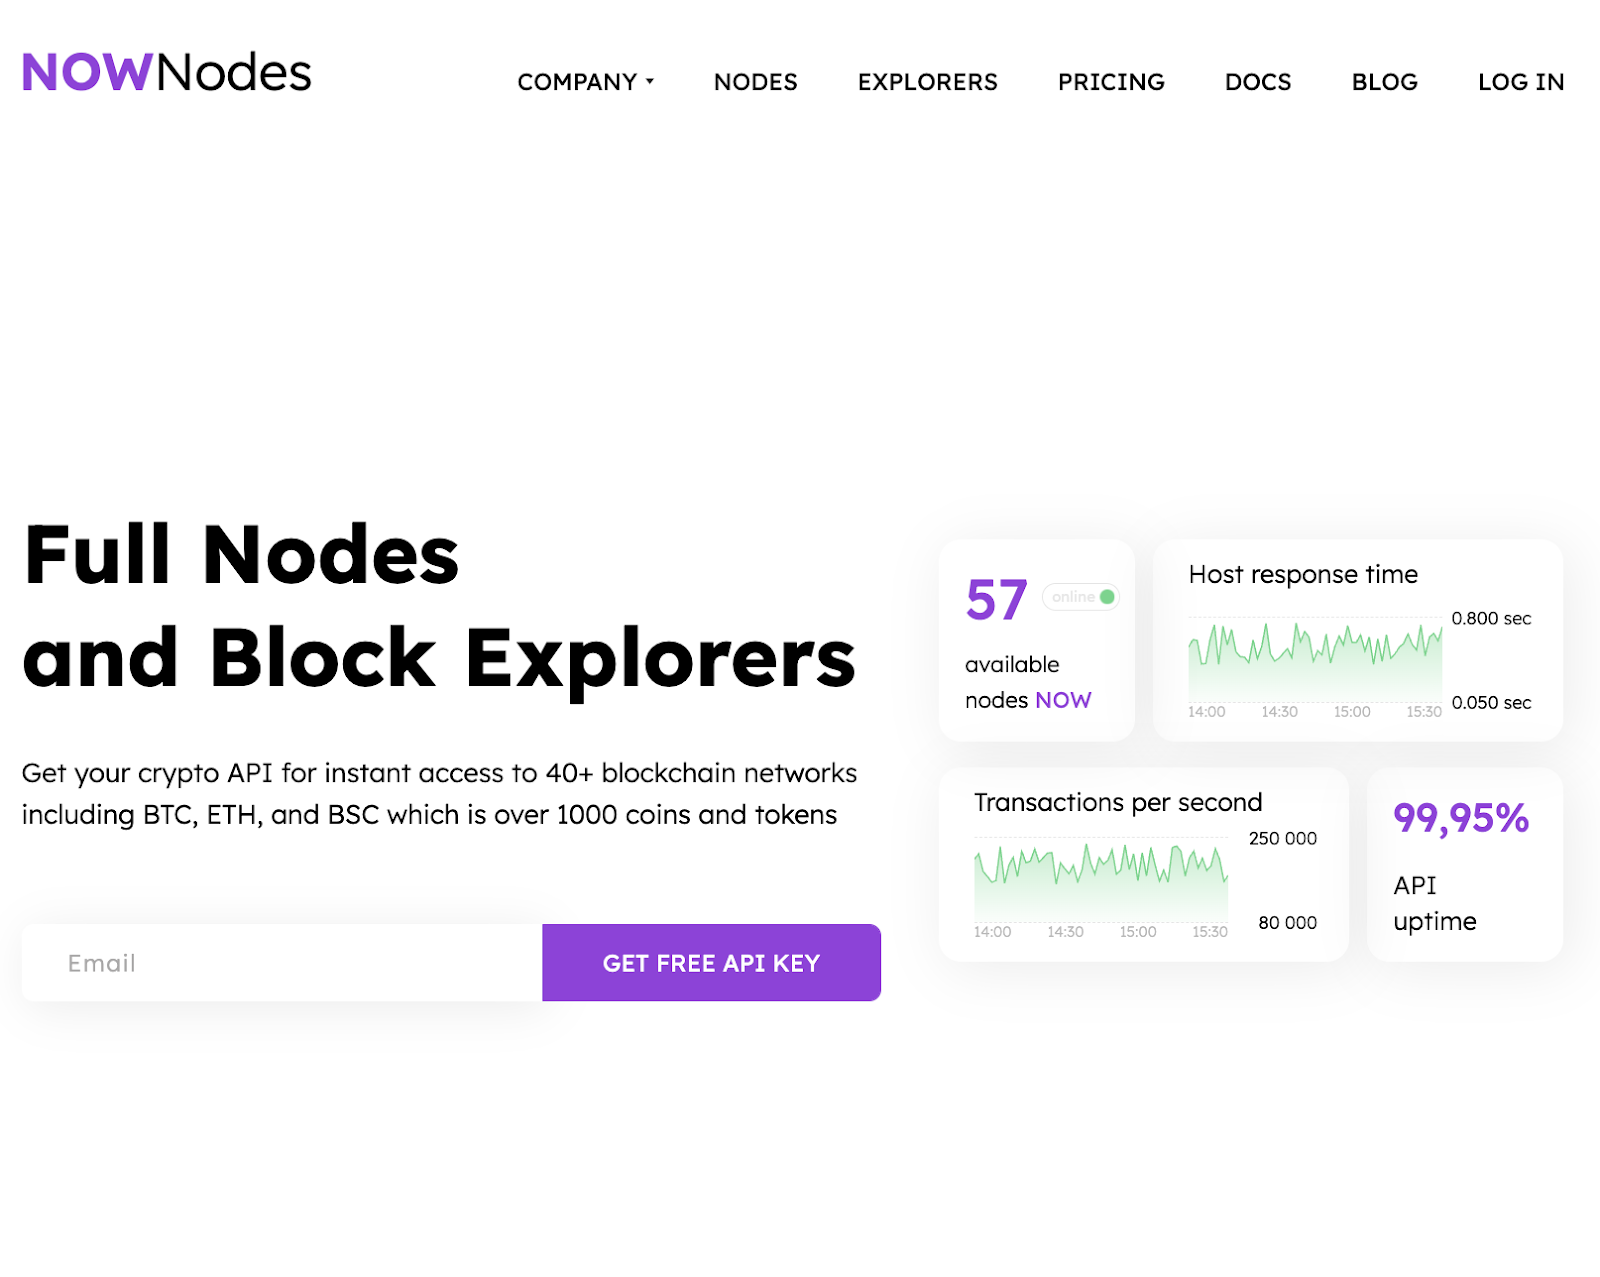 Get the API key from the NOWNodes Website